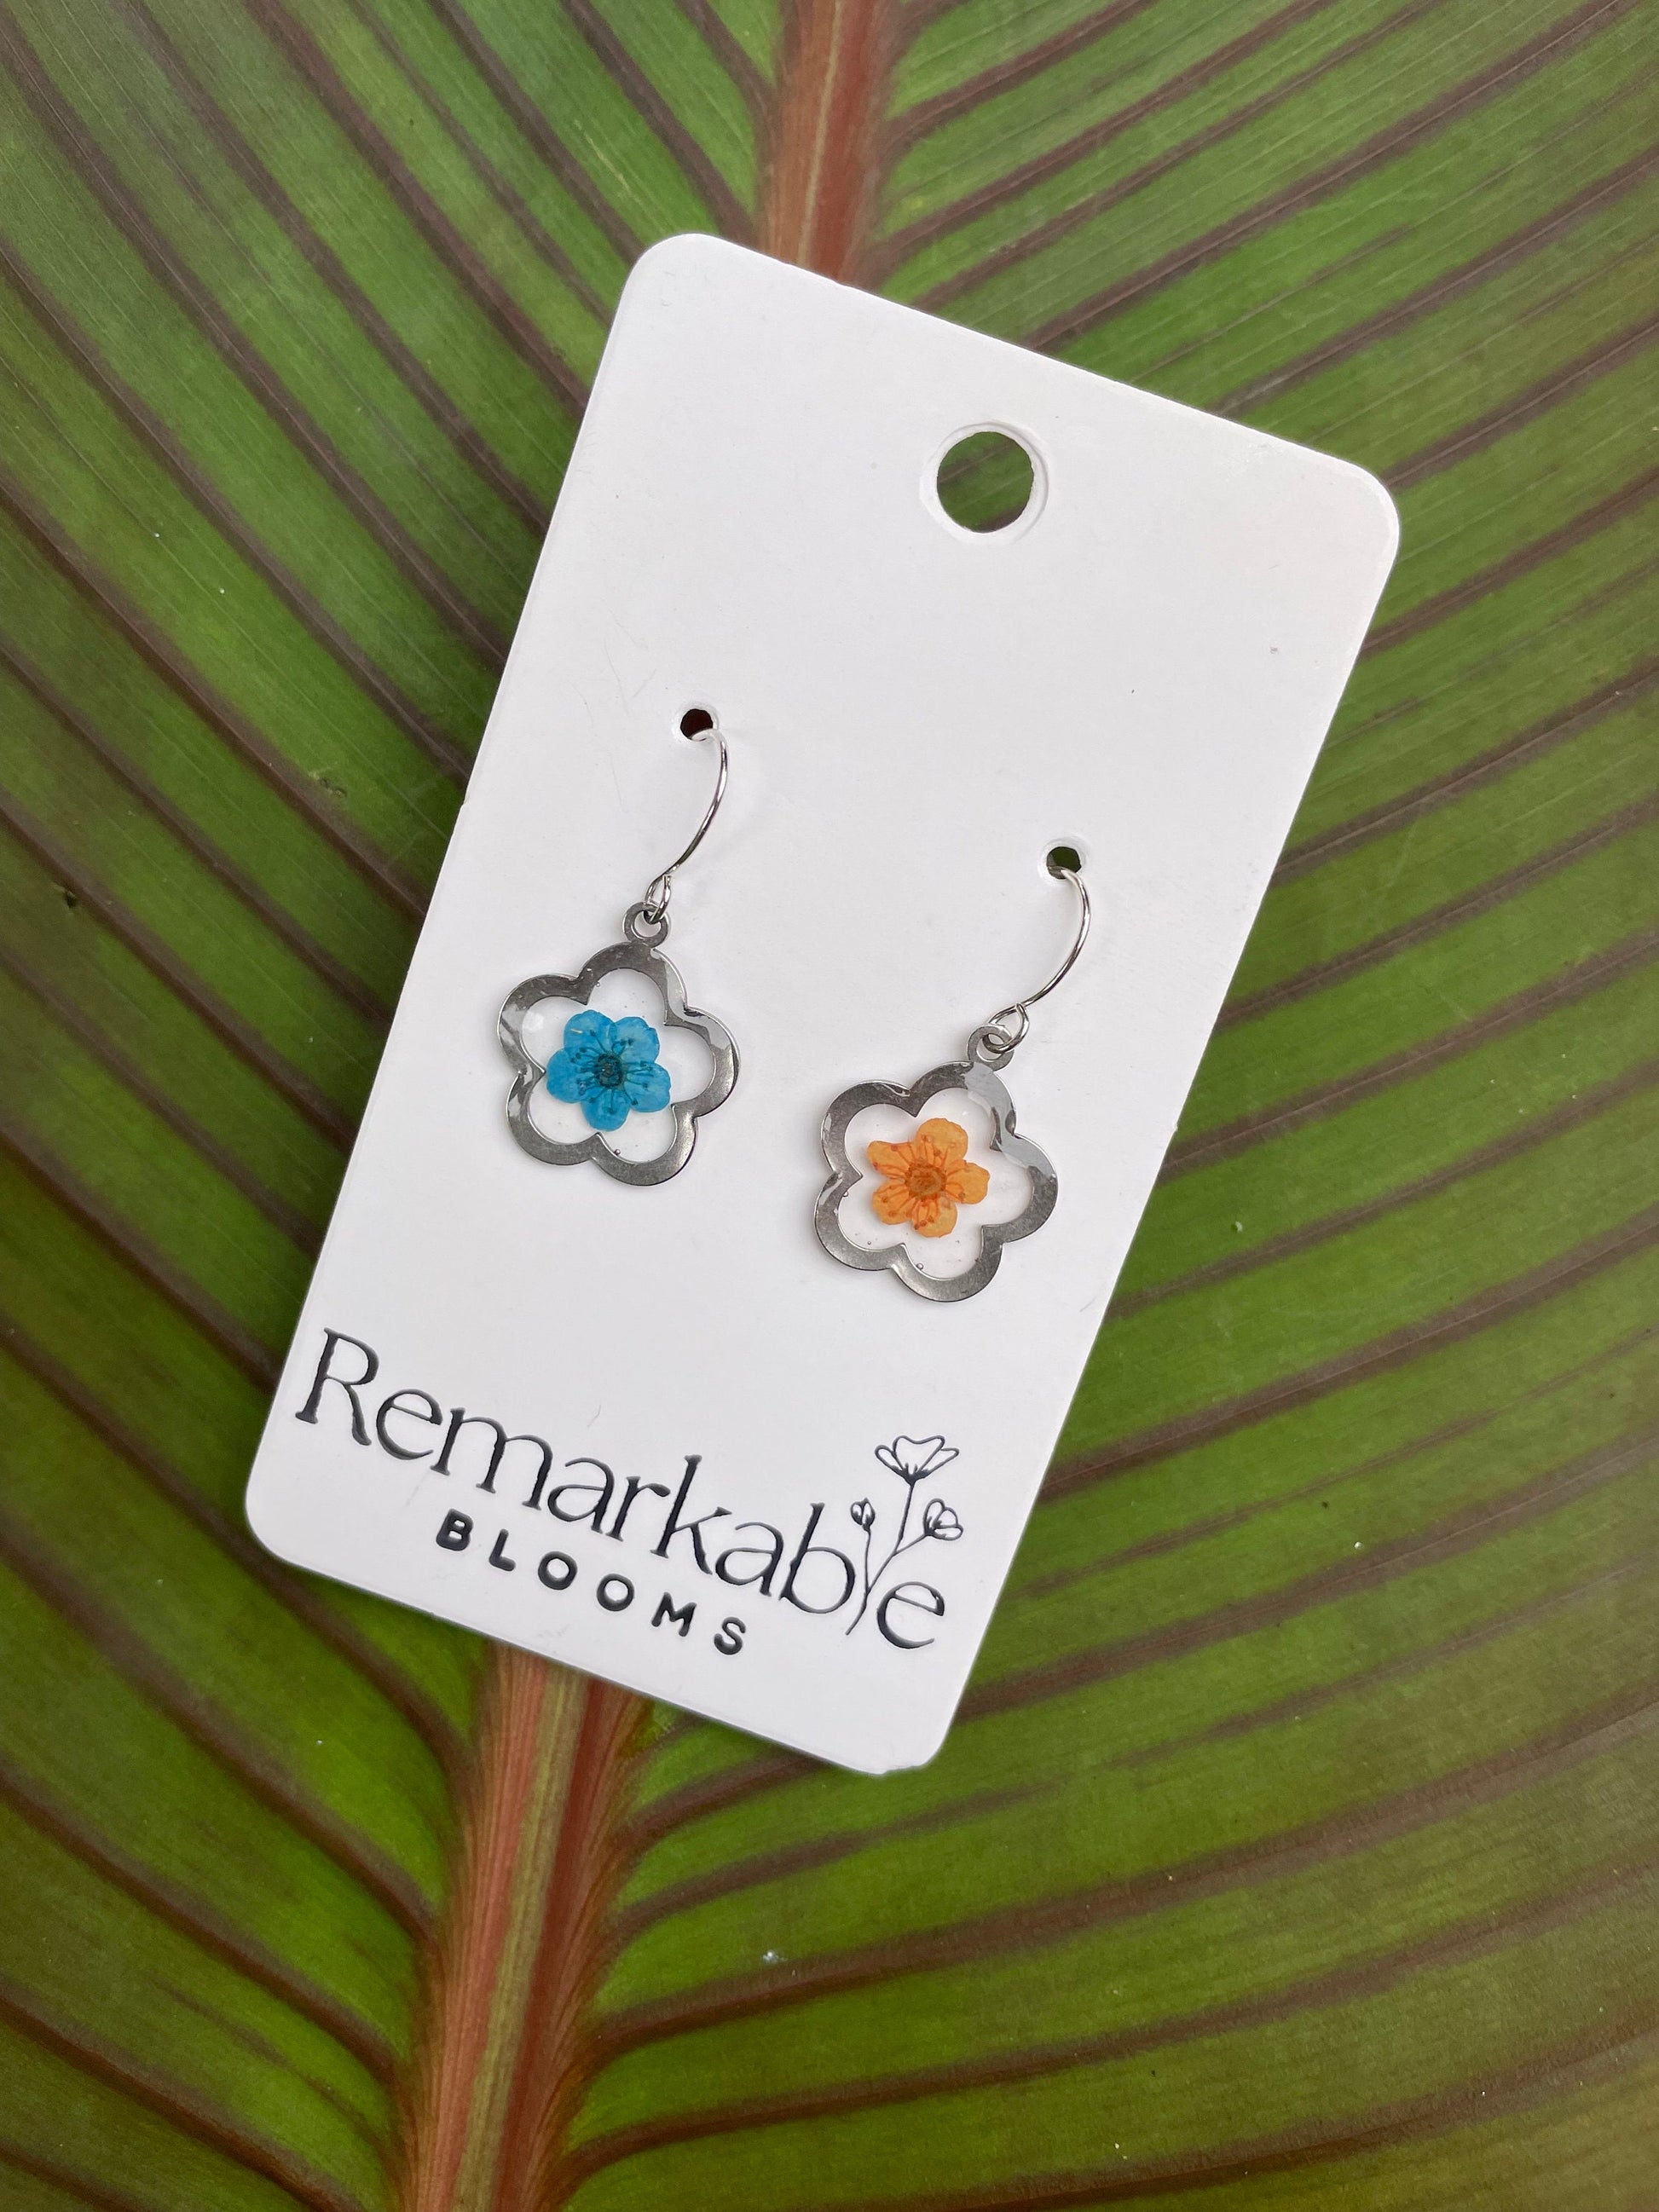 Dainty UF Gator Earrings. University of Florida. Orange and Blue. Made with real pressed flowers. Hypoallergenic Earrings. 14K gold.